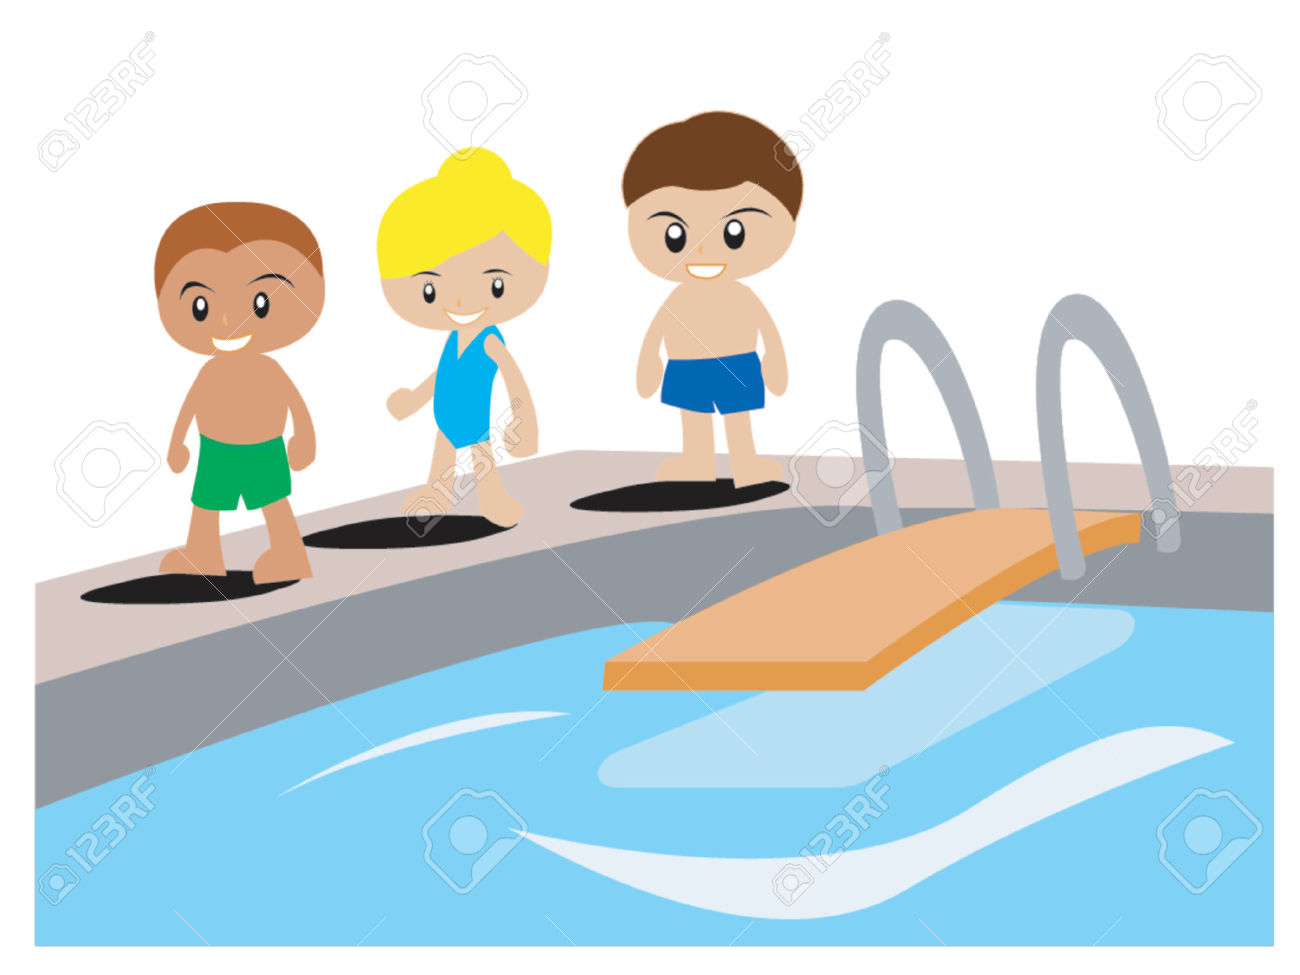 Boys swimming pool clipart - Swimming Images Clip Art